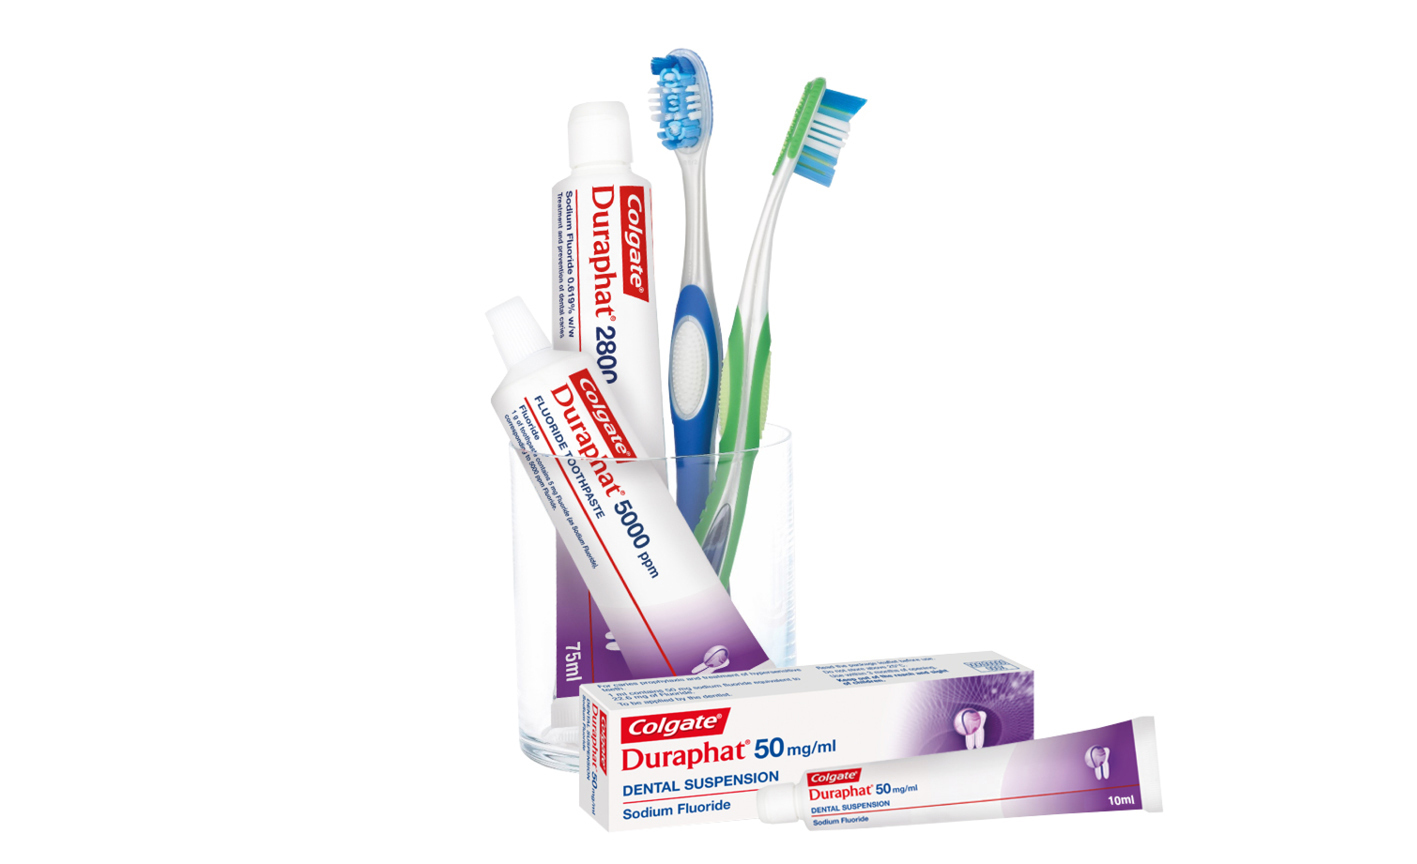 The Power of Prevention: How Colgate Duraphat 5000 Toothpaste Fights Cavities Like Never Before